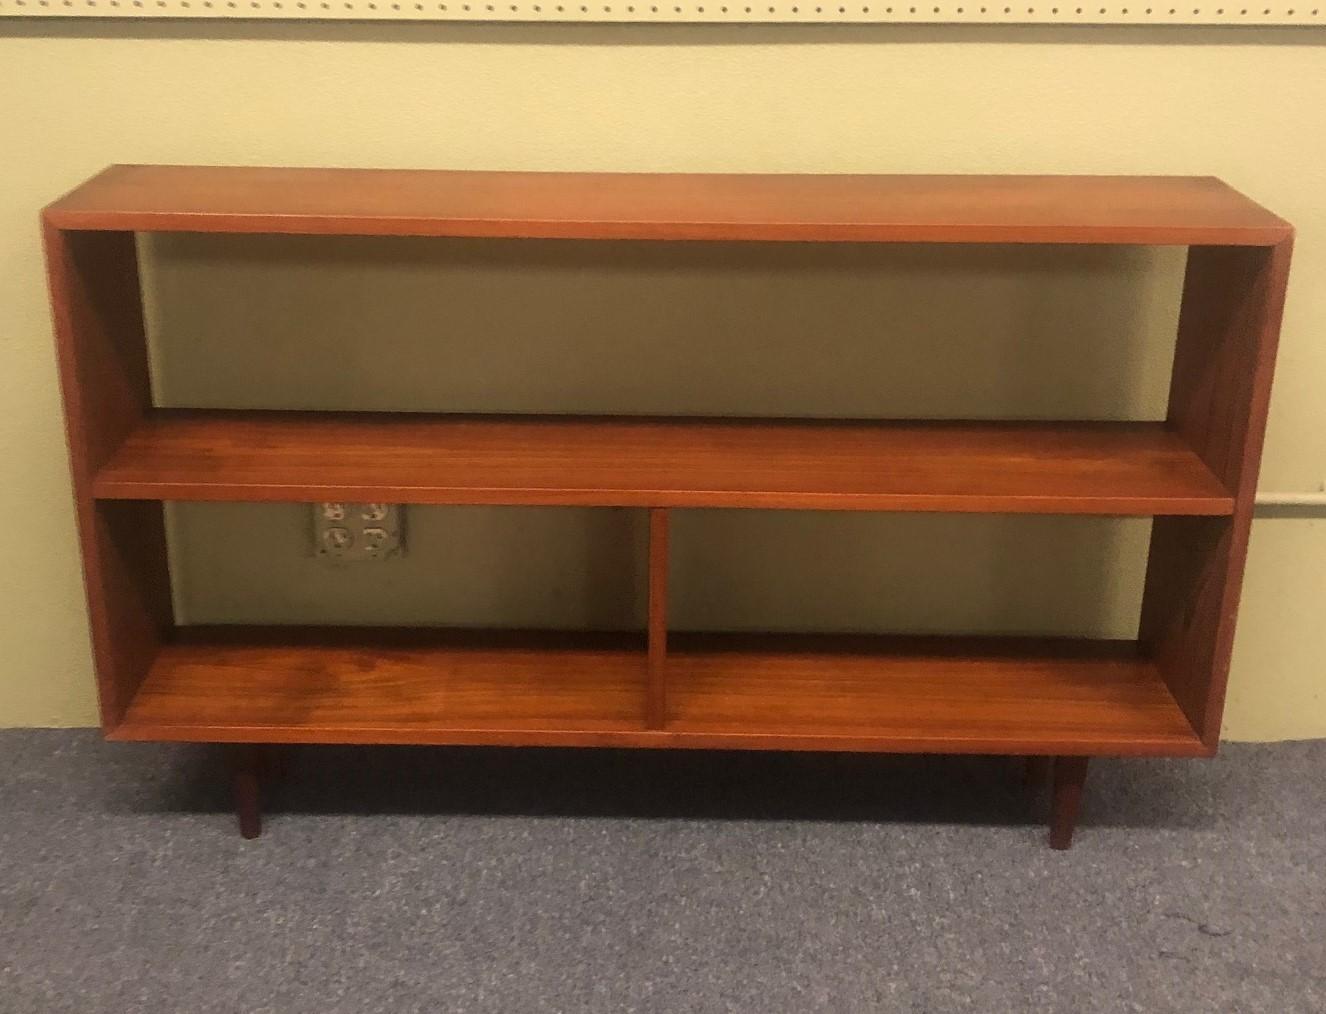 Mid-Century Modern backless low profile teak bookcase with tapered legs, circa 1960s. Wonderful wood grain and color! A very practical piece for a number of different spaces, can also be used as a room divider as it is finished on both sides.